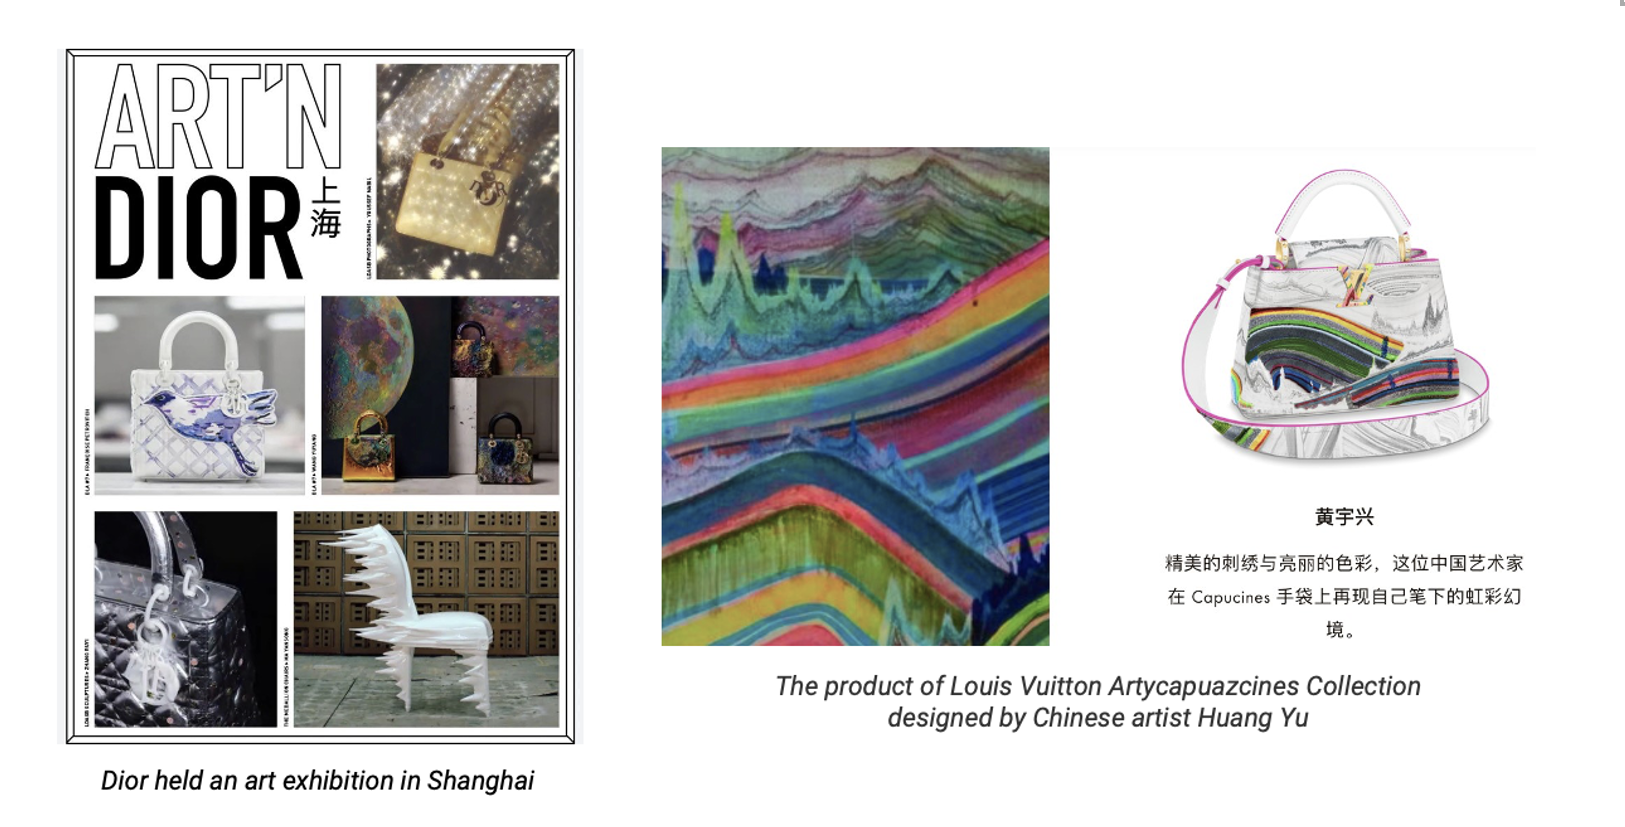 China art market: Luxury brands collaborating with Chinese artists